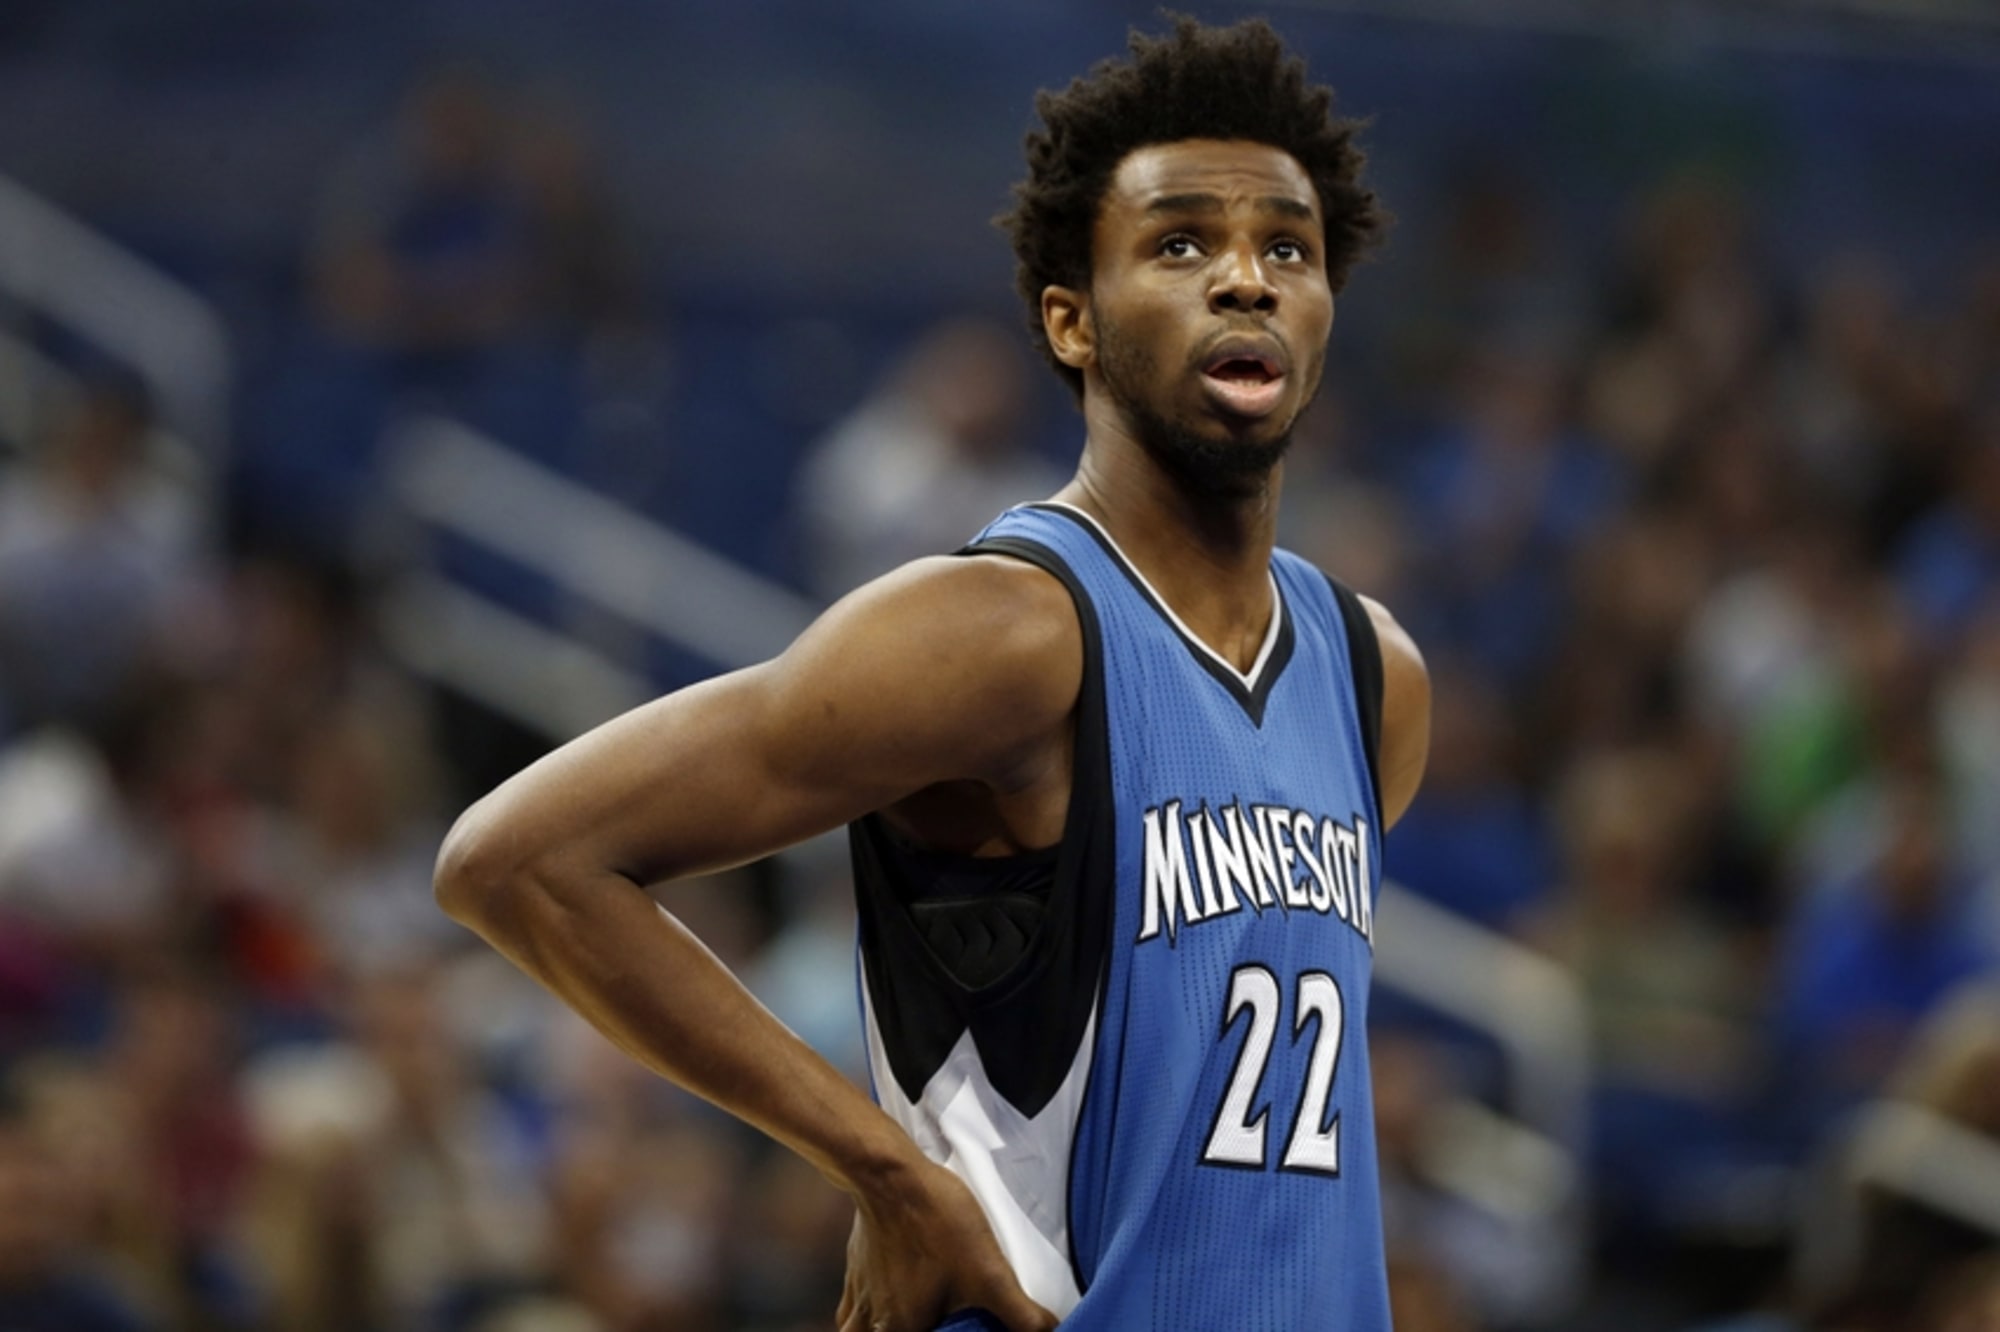 The growth of Timberwolves' star Andrew Wiggins